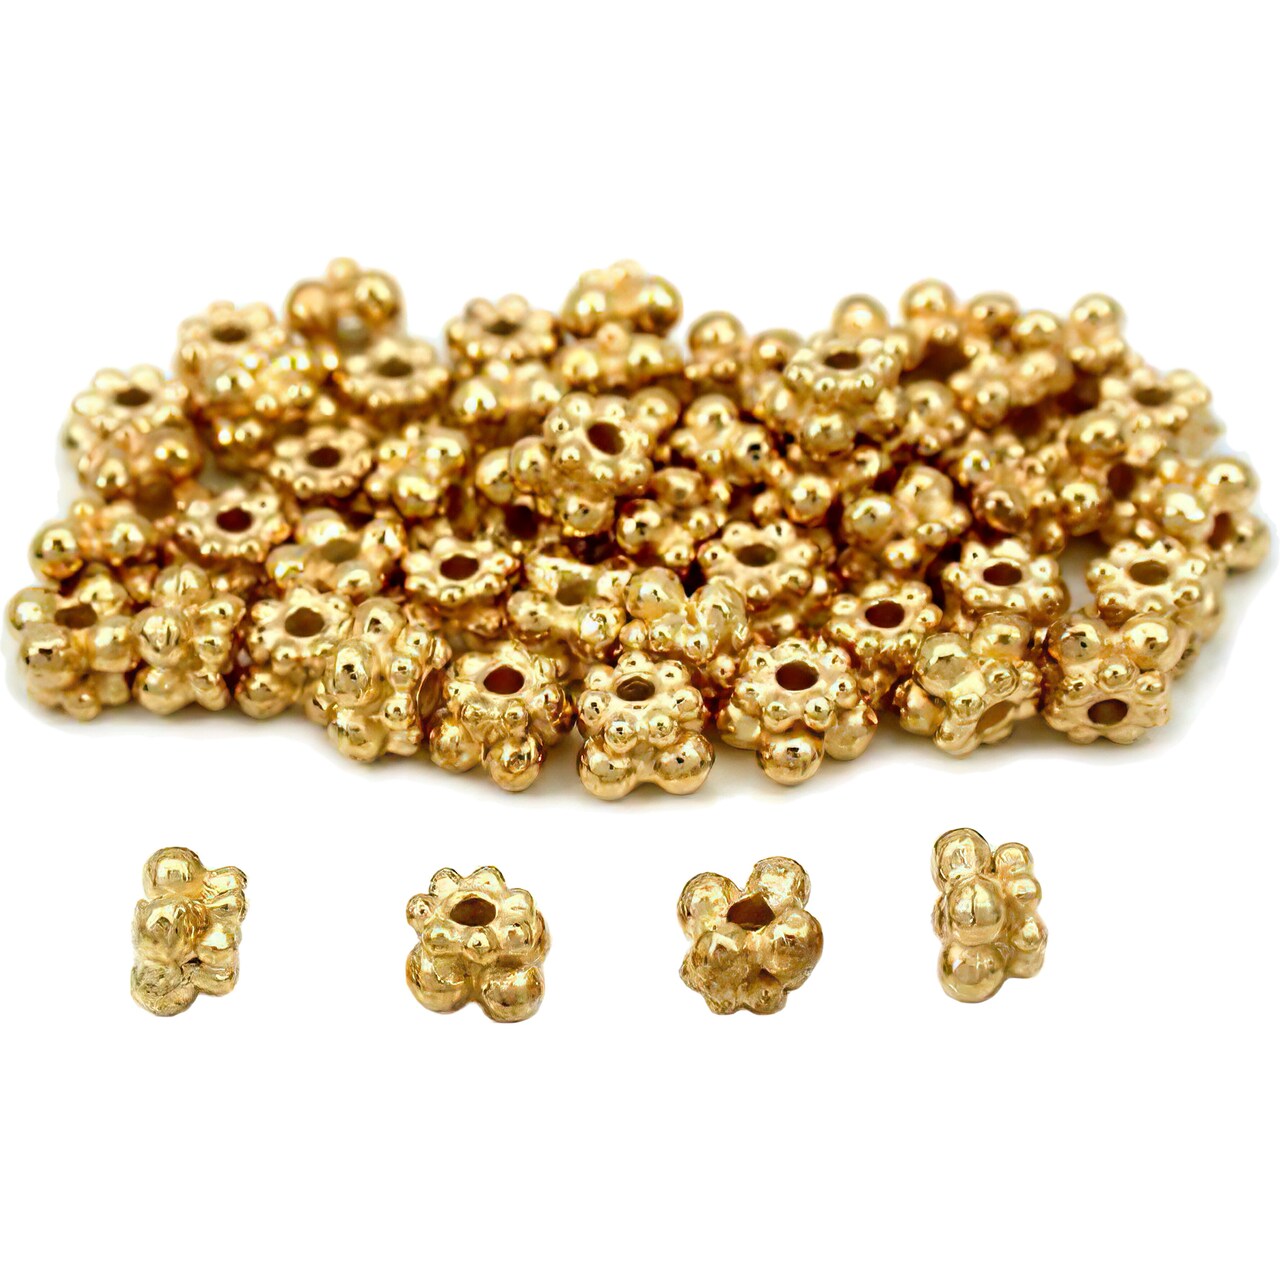 Bali Spacer Beads Gold Plated Jewelry 5mm Approx 50